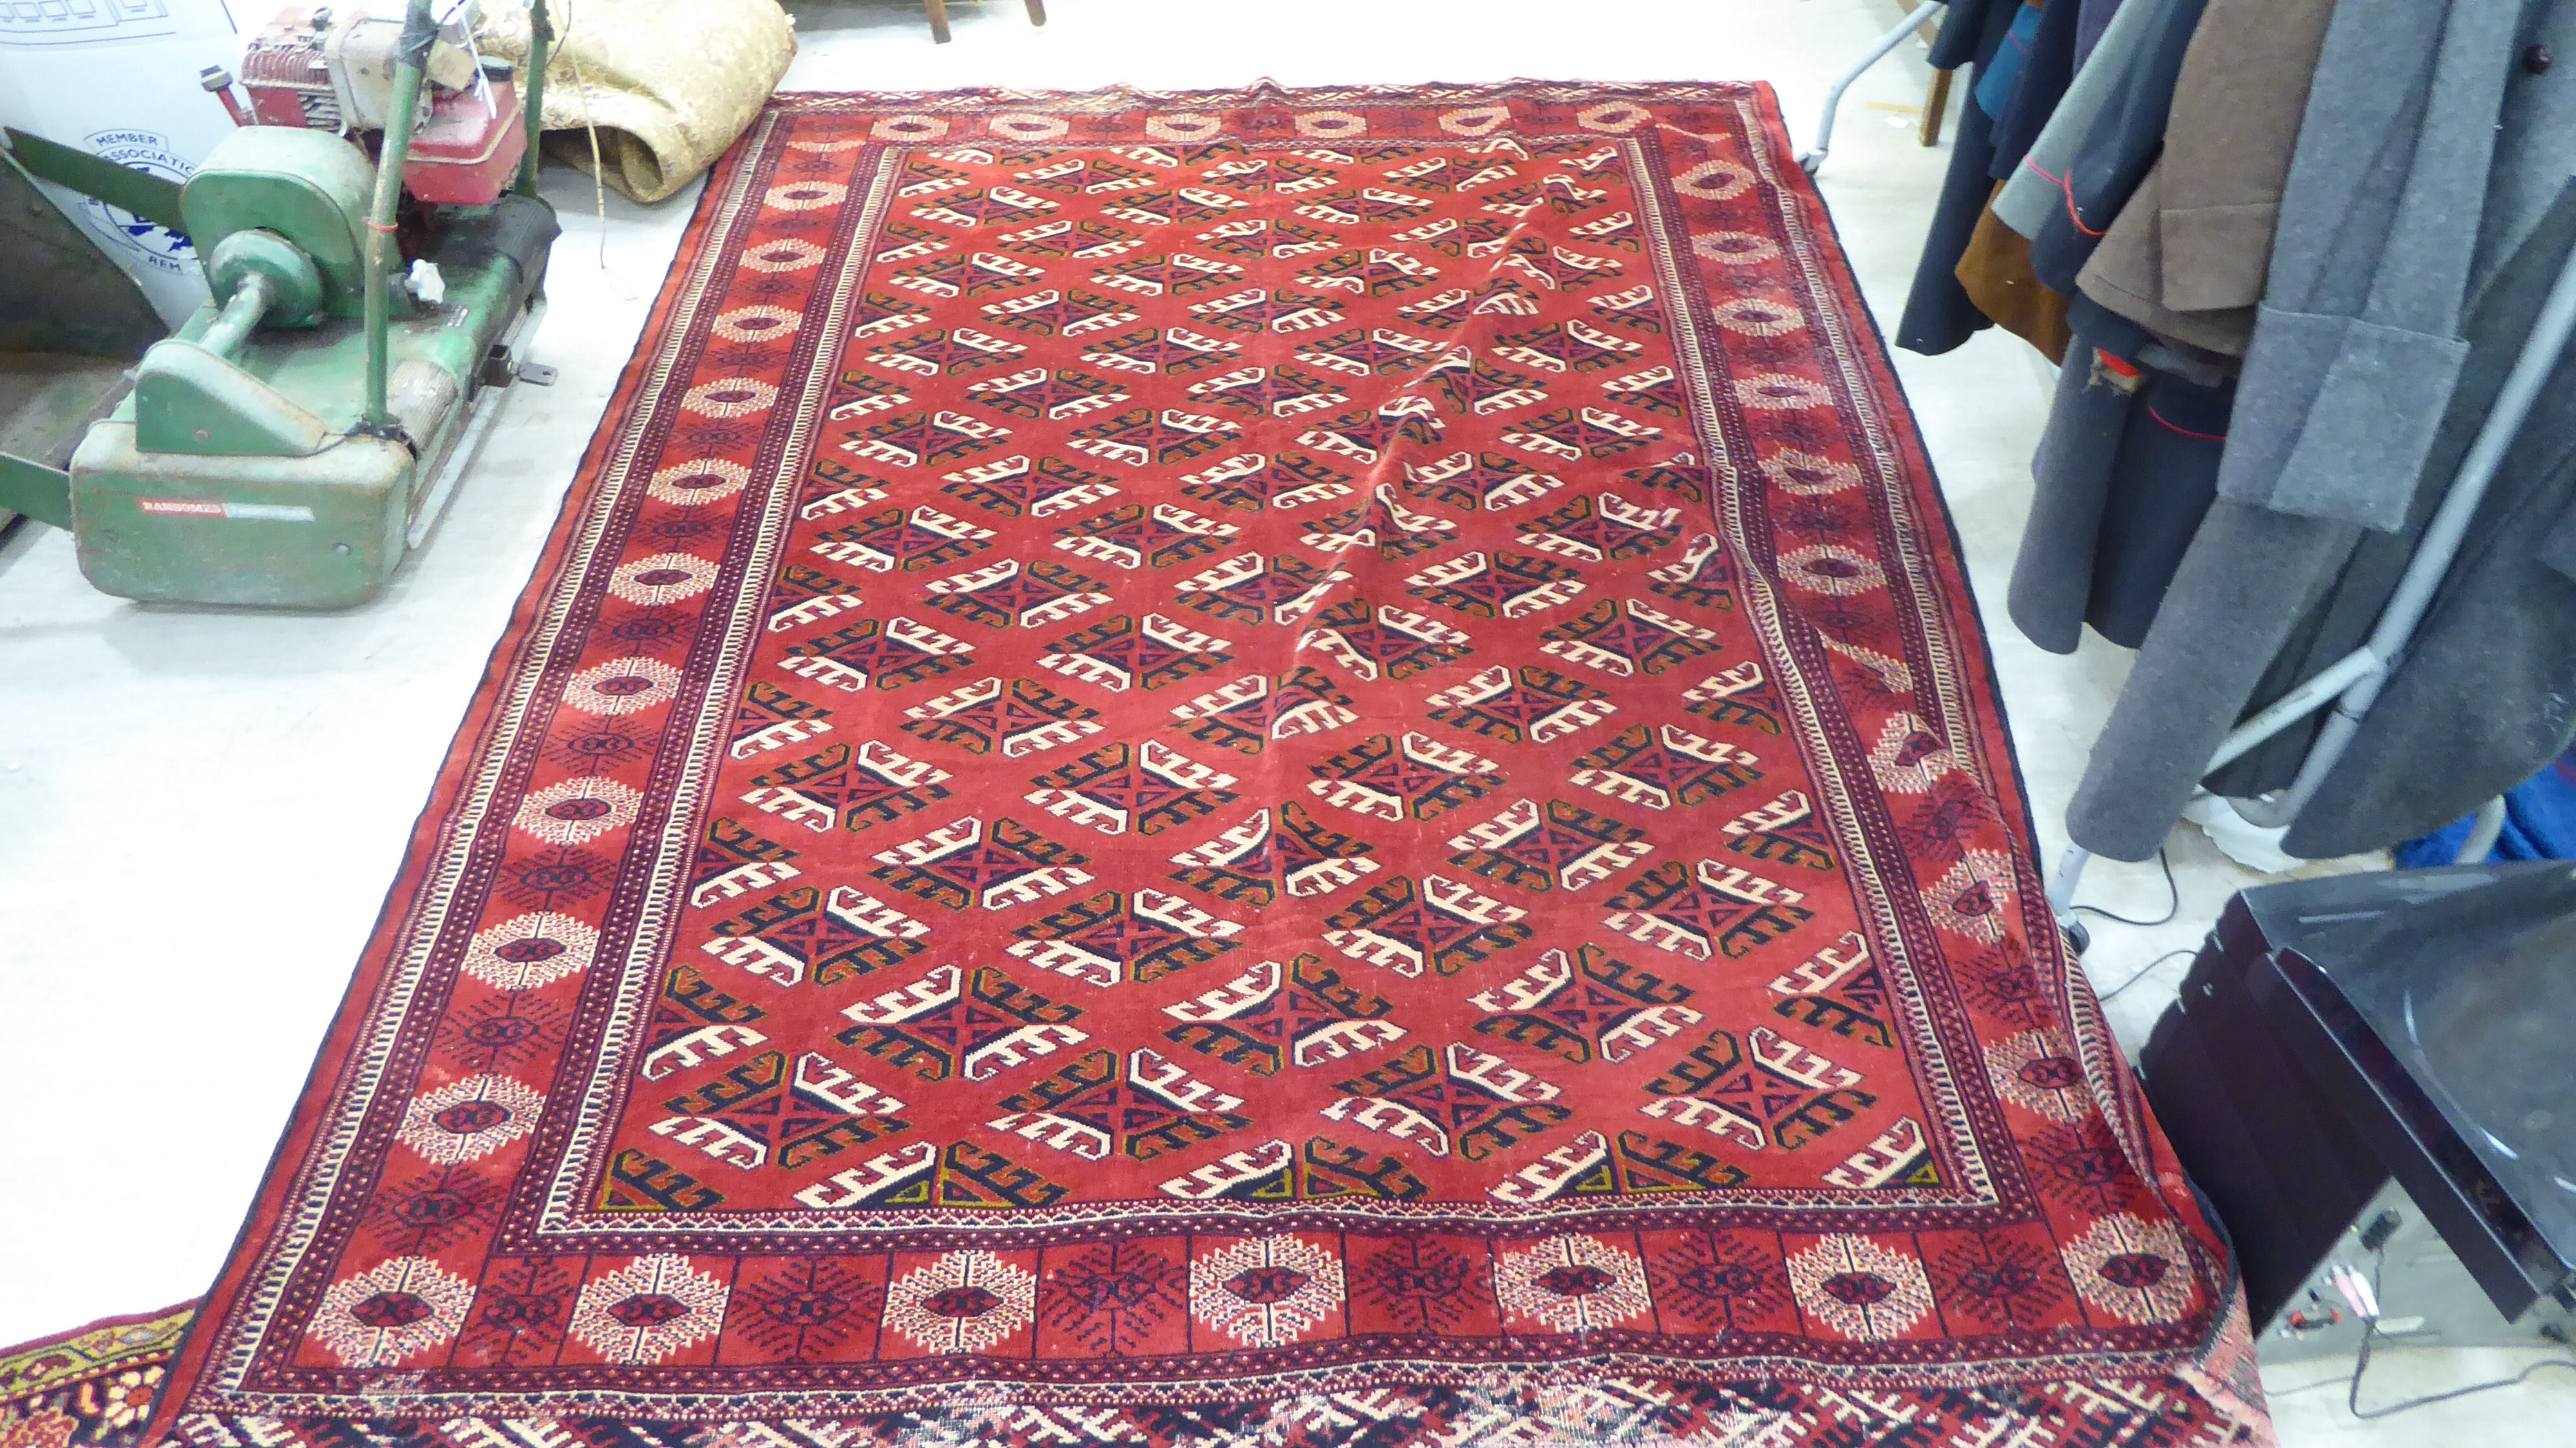 A Turkoman carpet, decorated with repeating stylised designs,